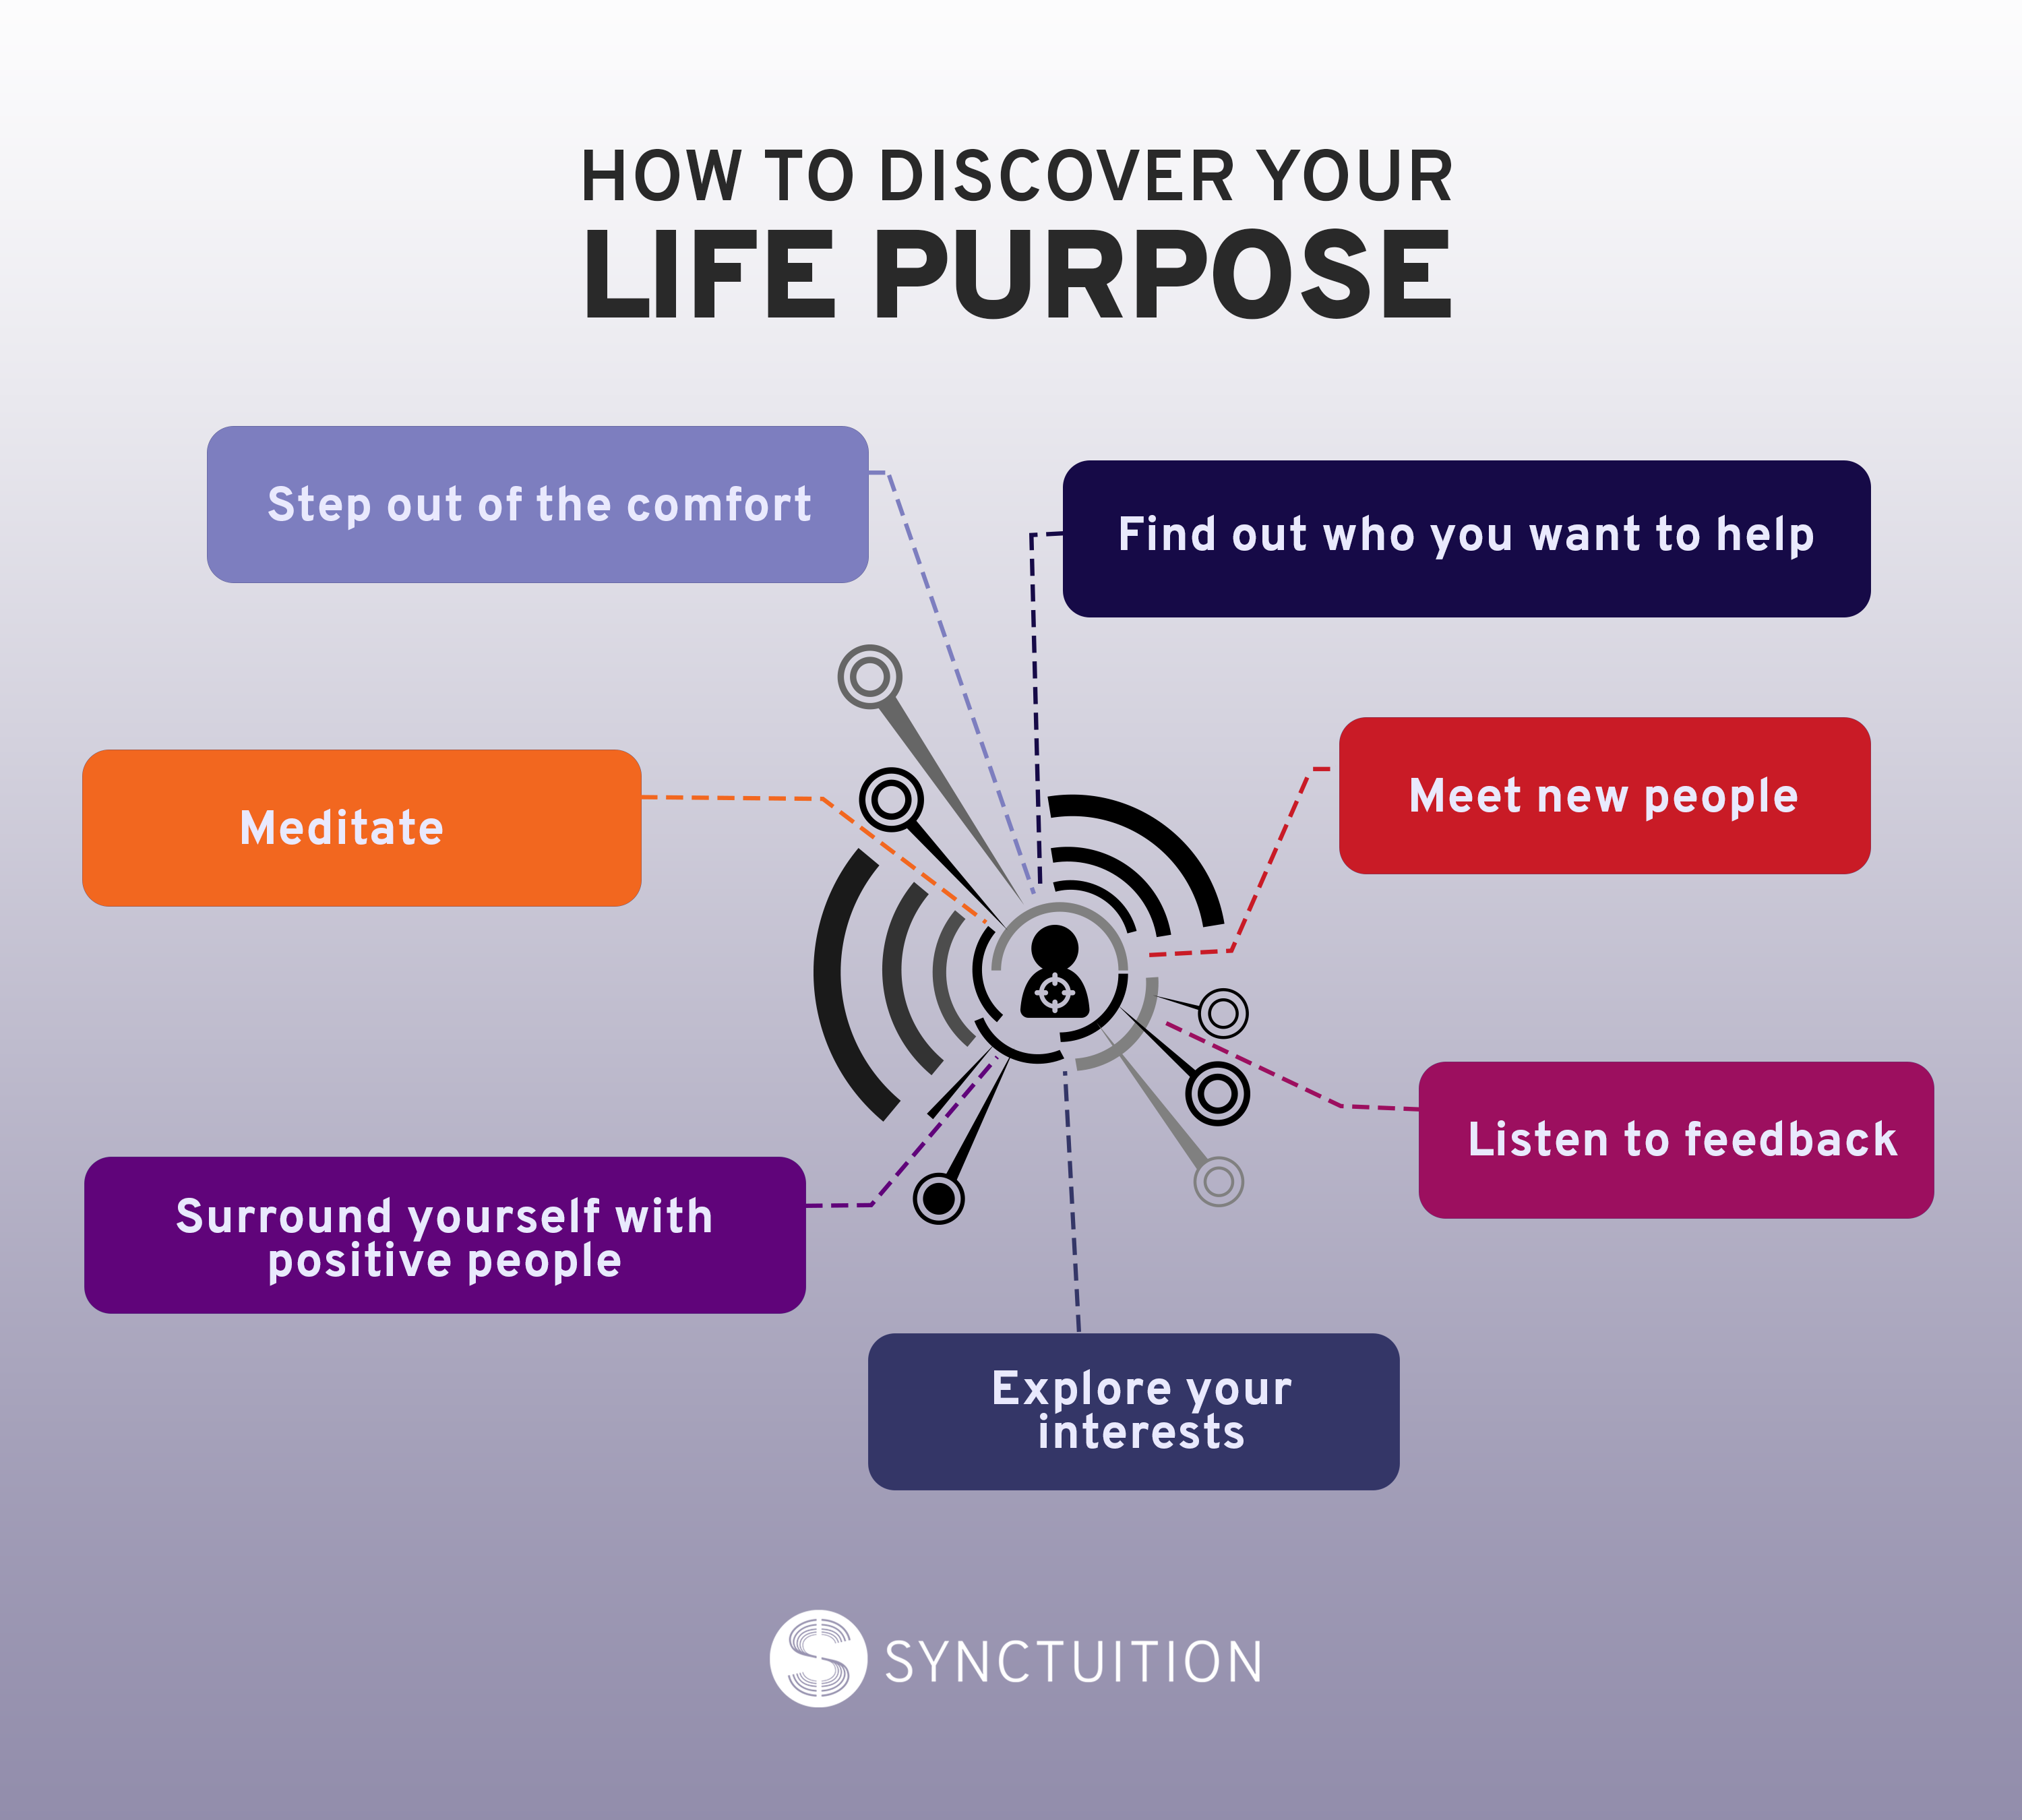 Tips to discover your life purpose